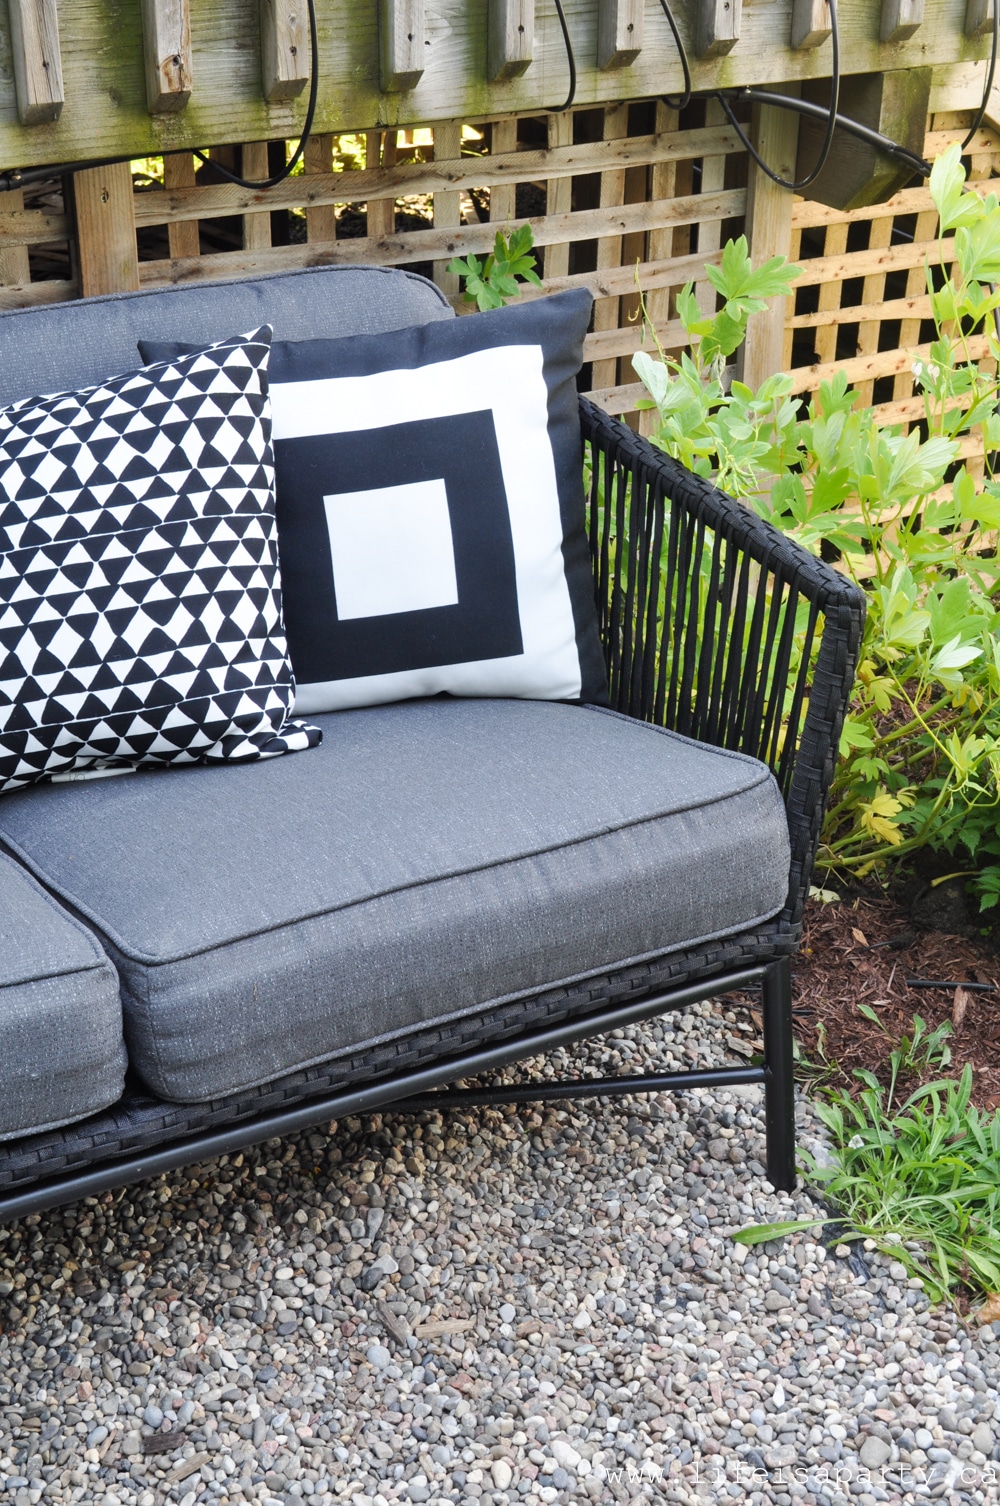 Black and White Garden seating area